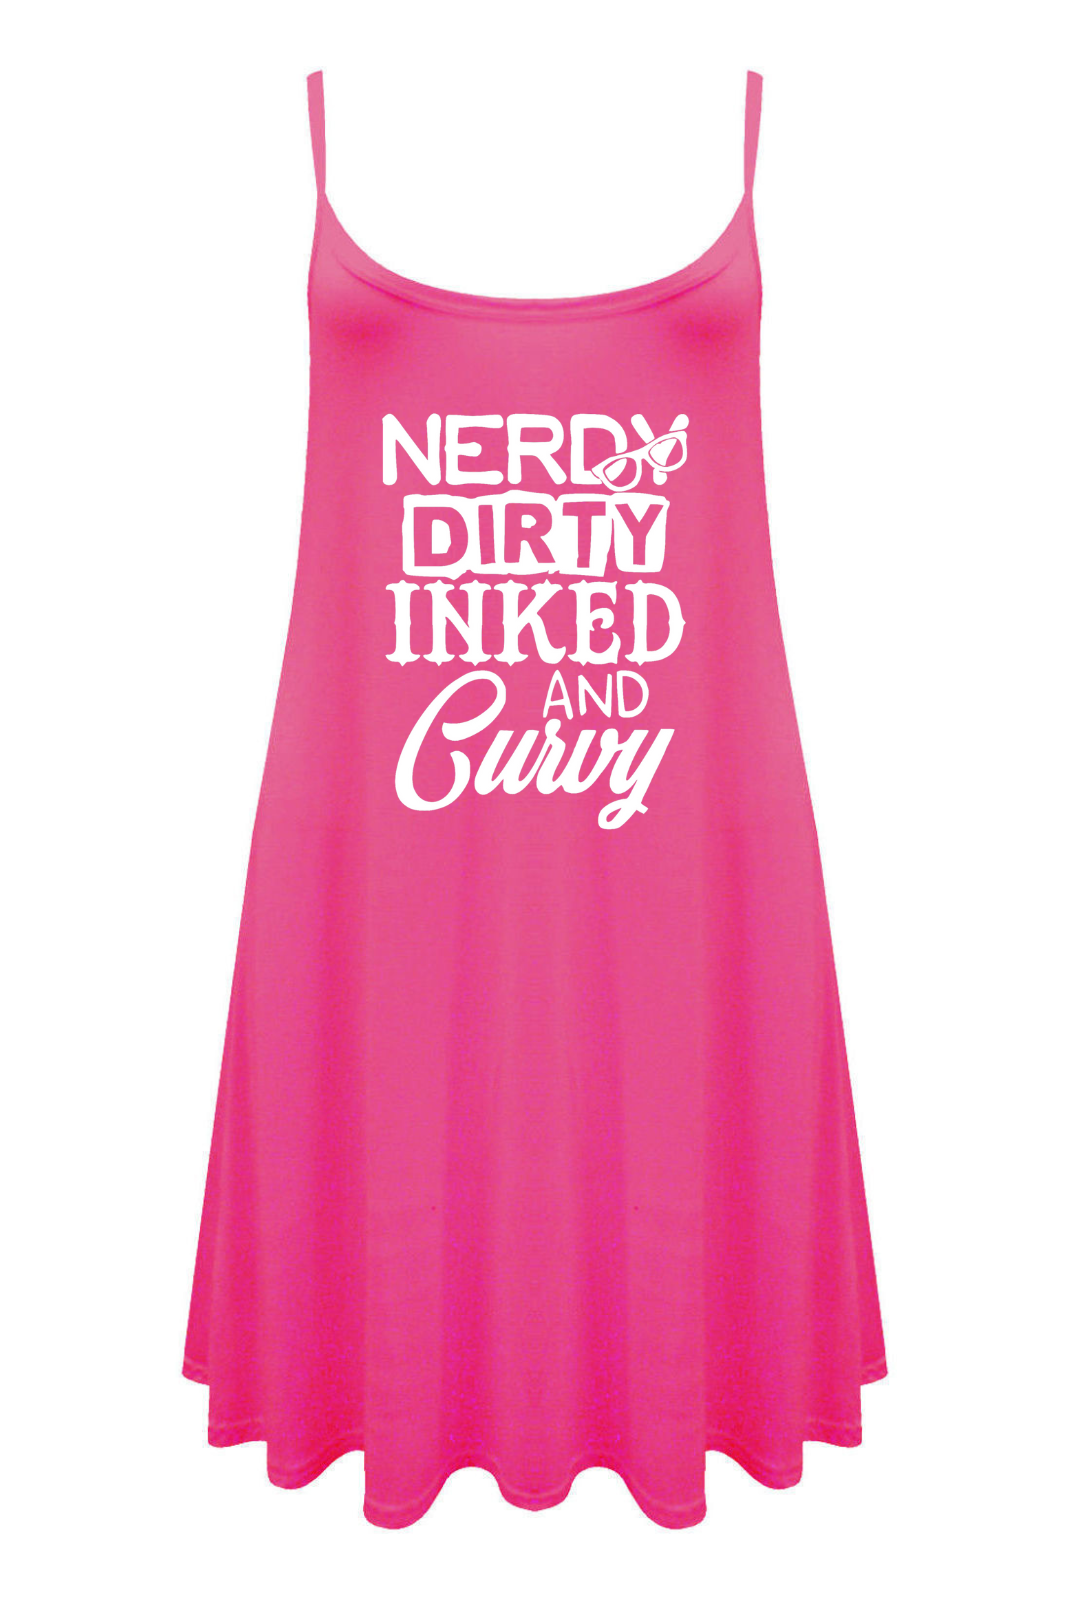 Hot Pink "Nerdy, Dirty" Printed Longline Camisole